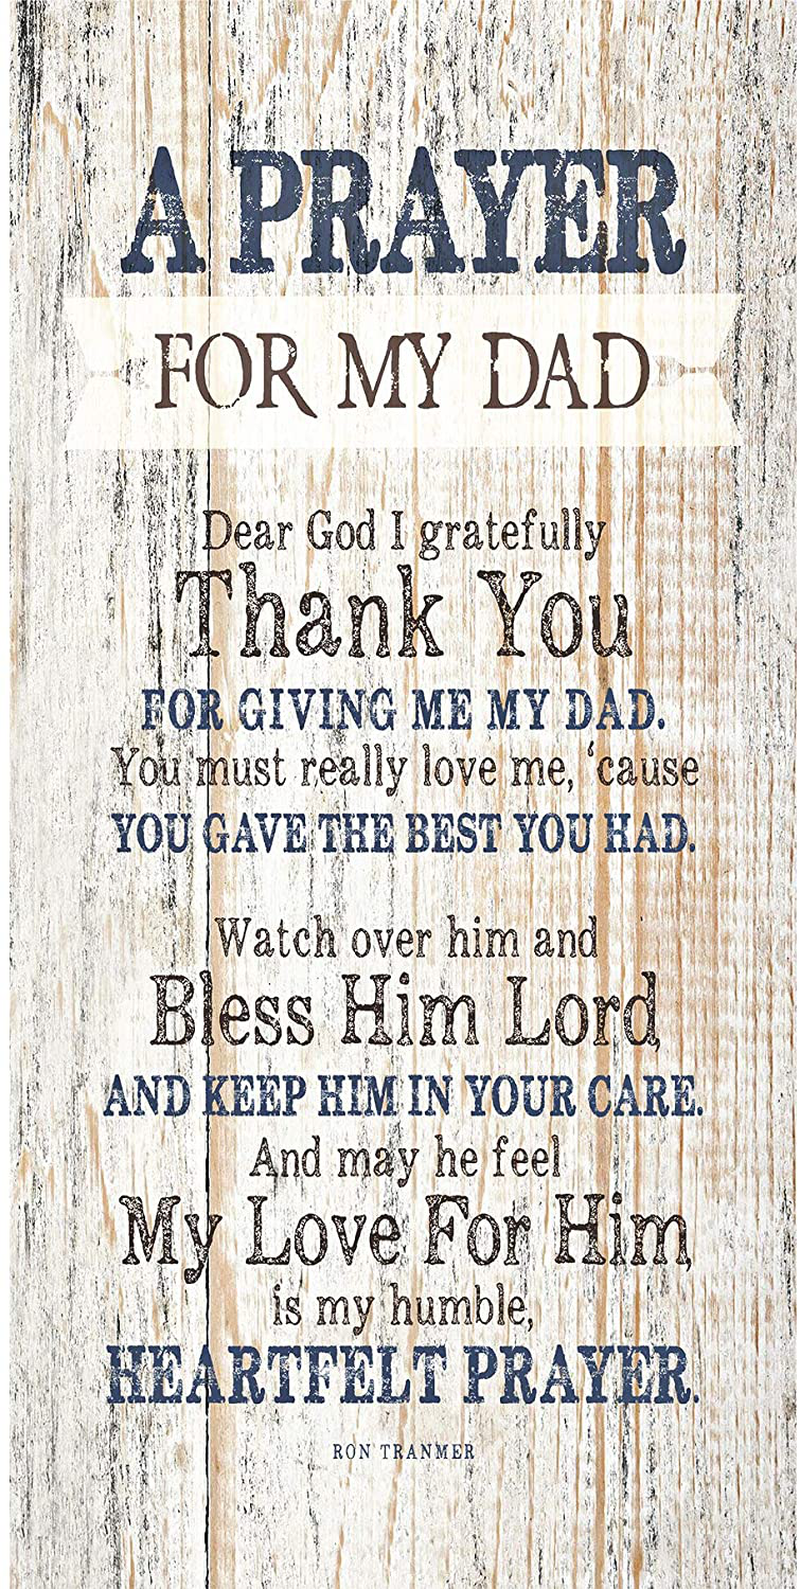 Dad (Father) Prayer Wood Plaque with Inspiring Quotes 6x9 - Classy Vertical Frame Wall & Tabletop Decoration | Easel & Hanging Hook | Dear God I Gratefully Thank You for Giving me My dad Home & Garden > Decor > Seasonal & Holiday Decorations& Garden > Decor > Seasonal & Holiday Decorations Dexsa 6 3/4" x 13 5/8"  